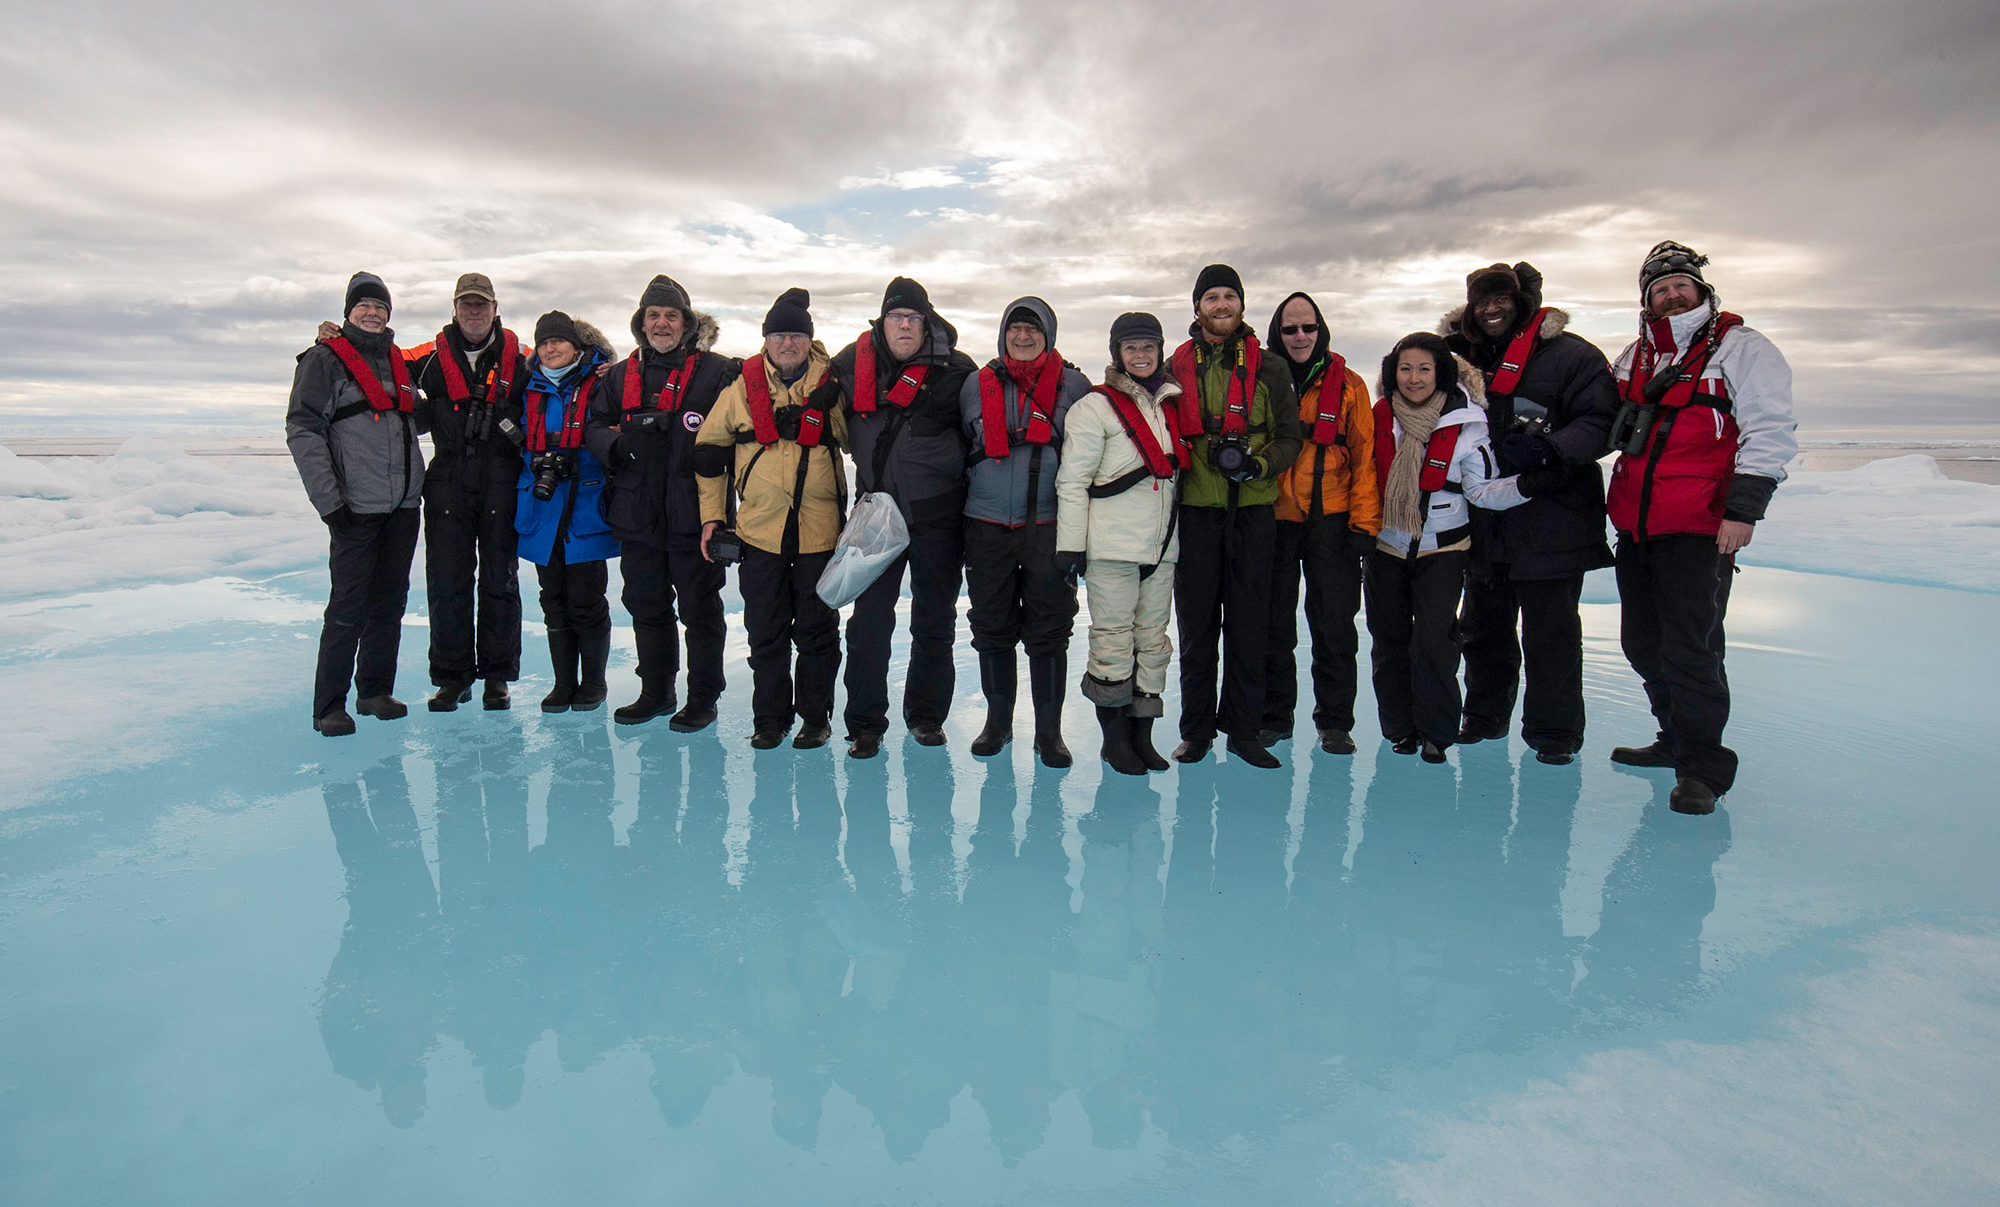 Group photo from a previous trip on an ice flow in the Arctic Ocean